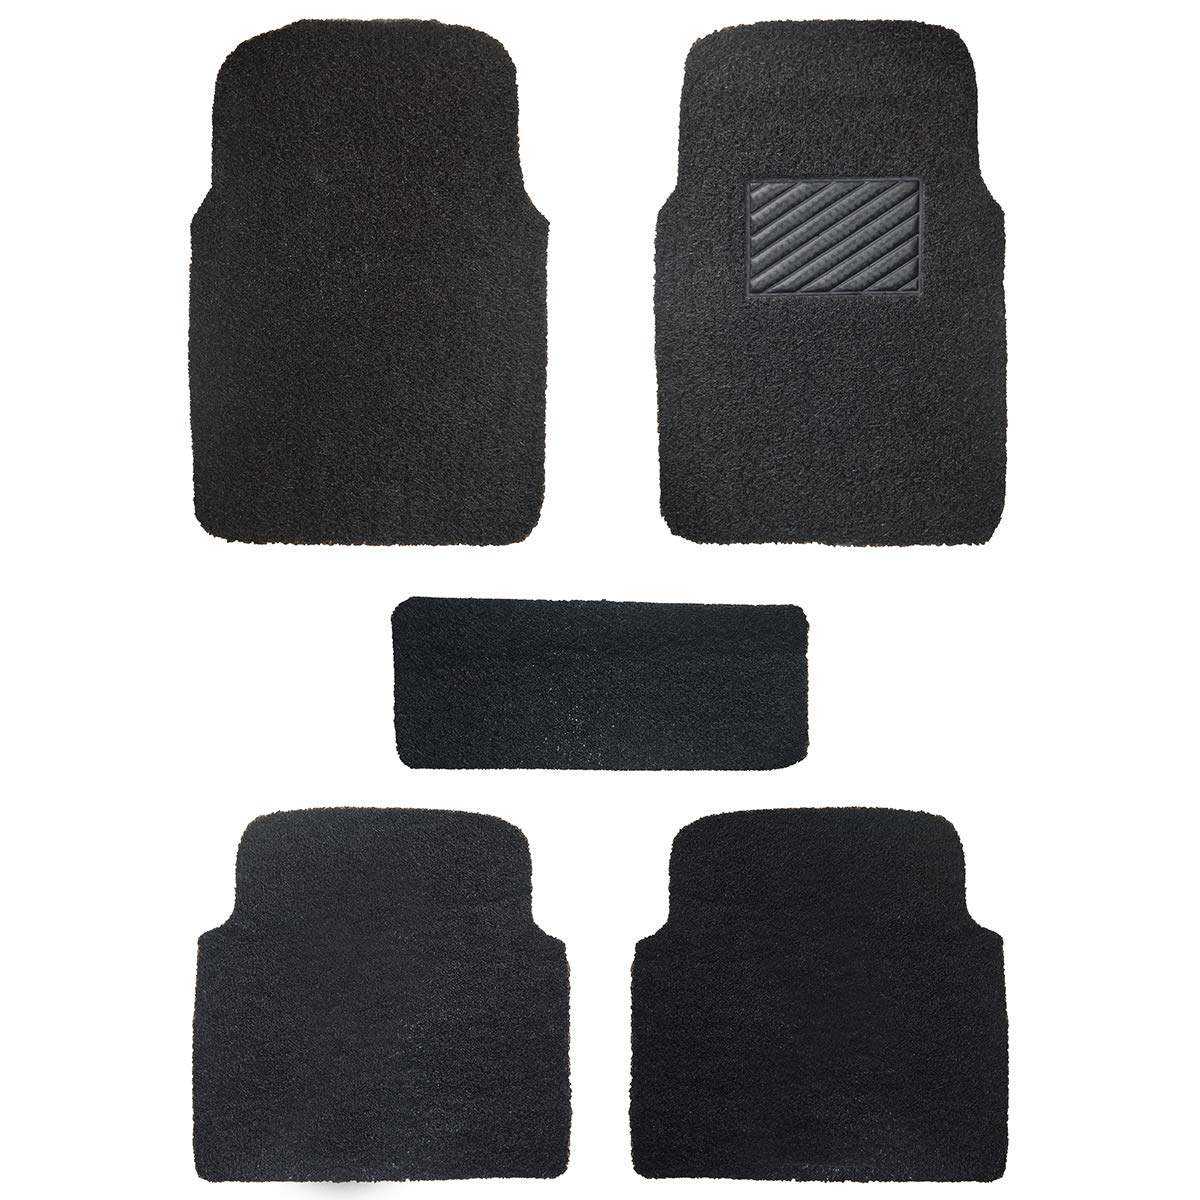 Curly Car Foot Mat, Superior Powerful Dirt Trapping Capacity, All Weather Resistant, Heavy Duty, UNIVERSAL FIT (12mm, 2 Rows)